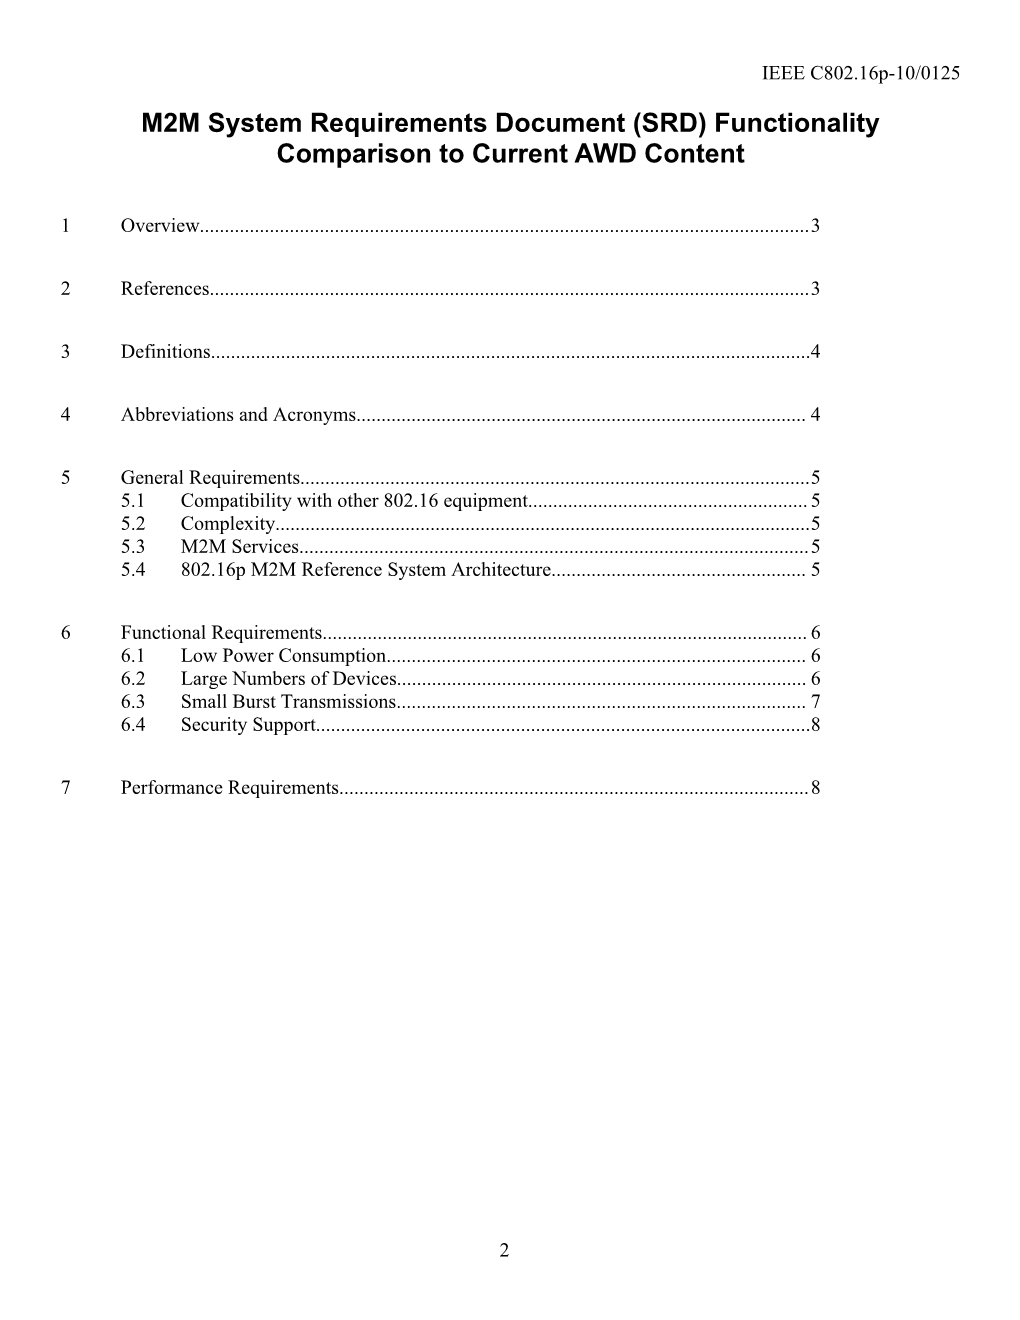 M2M System Requirements Document (SRD) Functionality Comparison to Current AWD Content